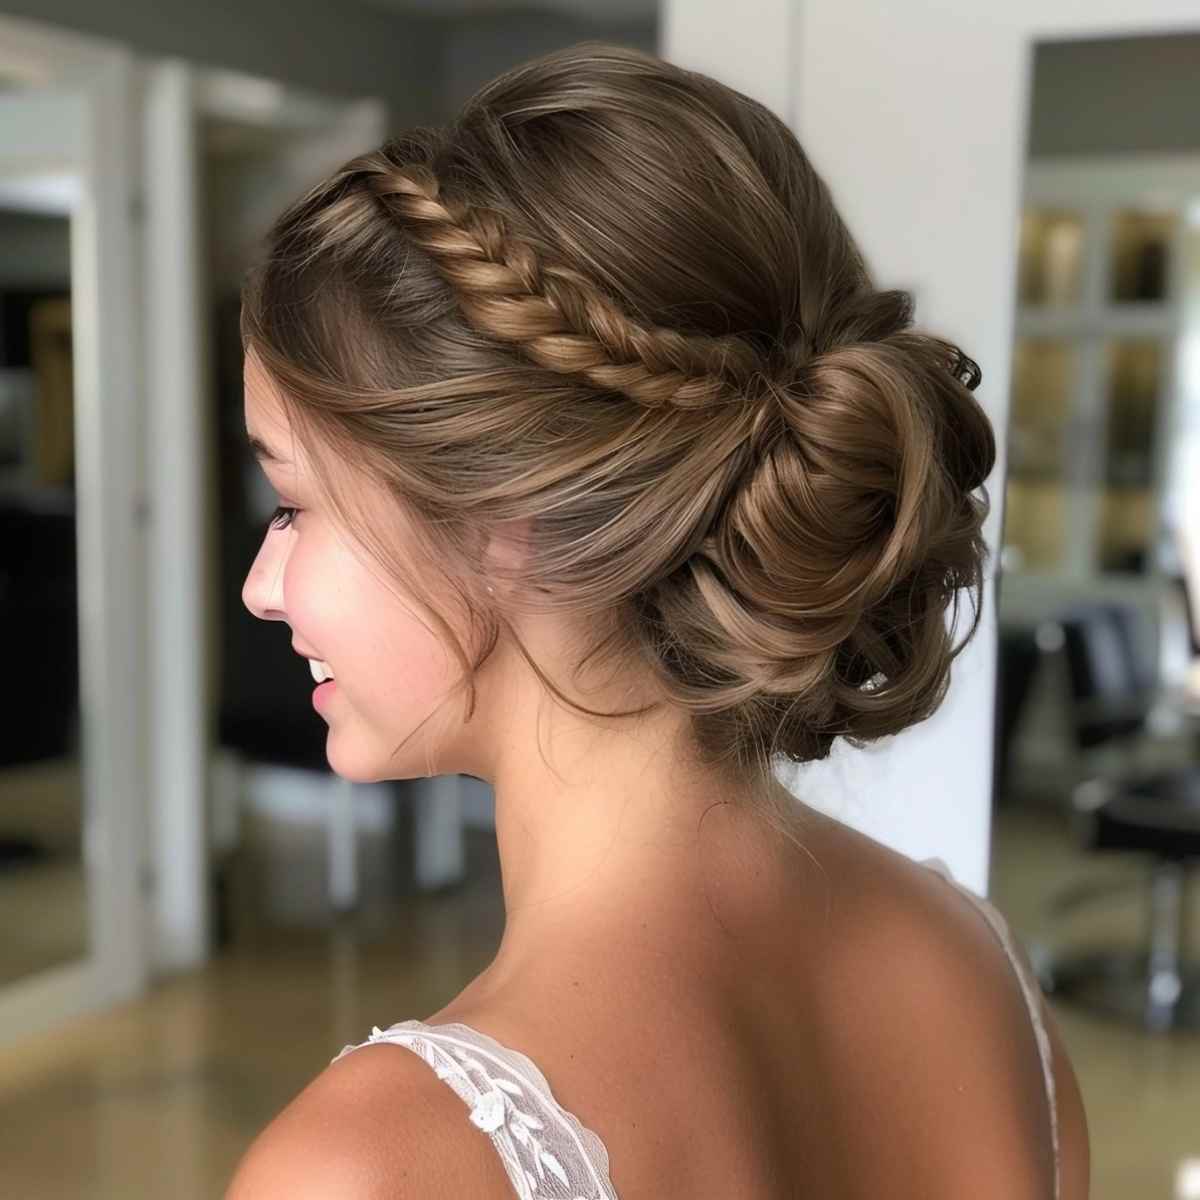 Curled Bun with Braided Detail hairstyle